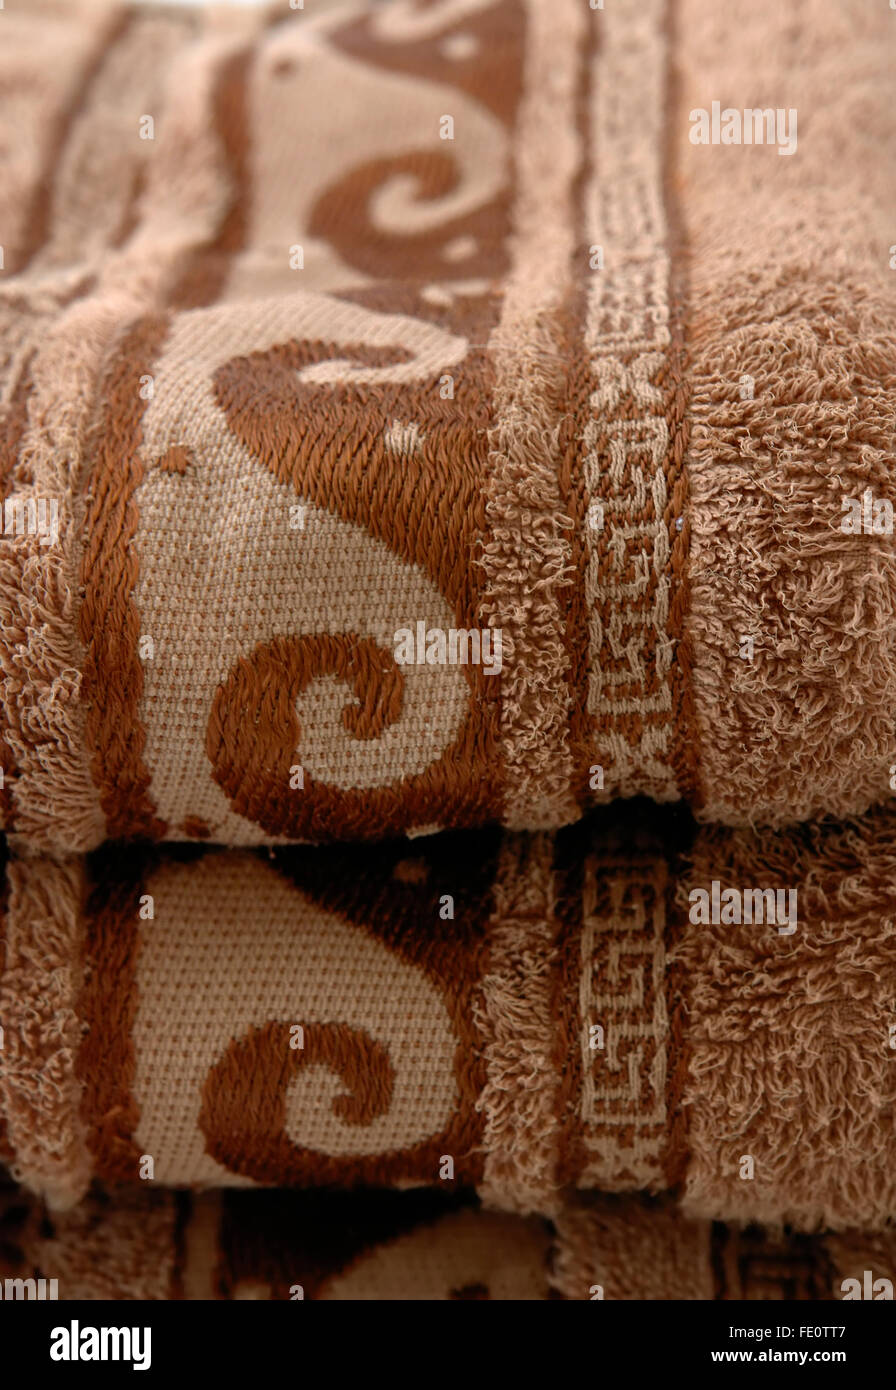 stack of brown towels with texture Stock Photo